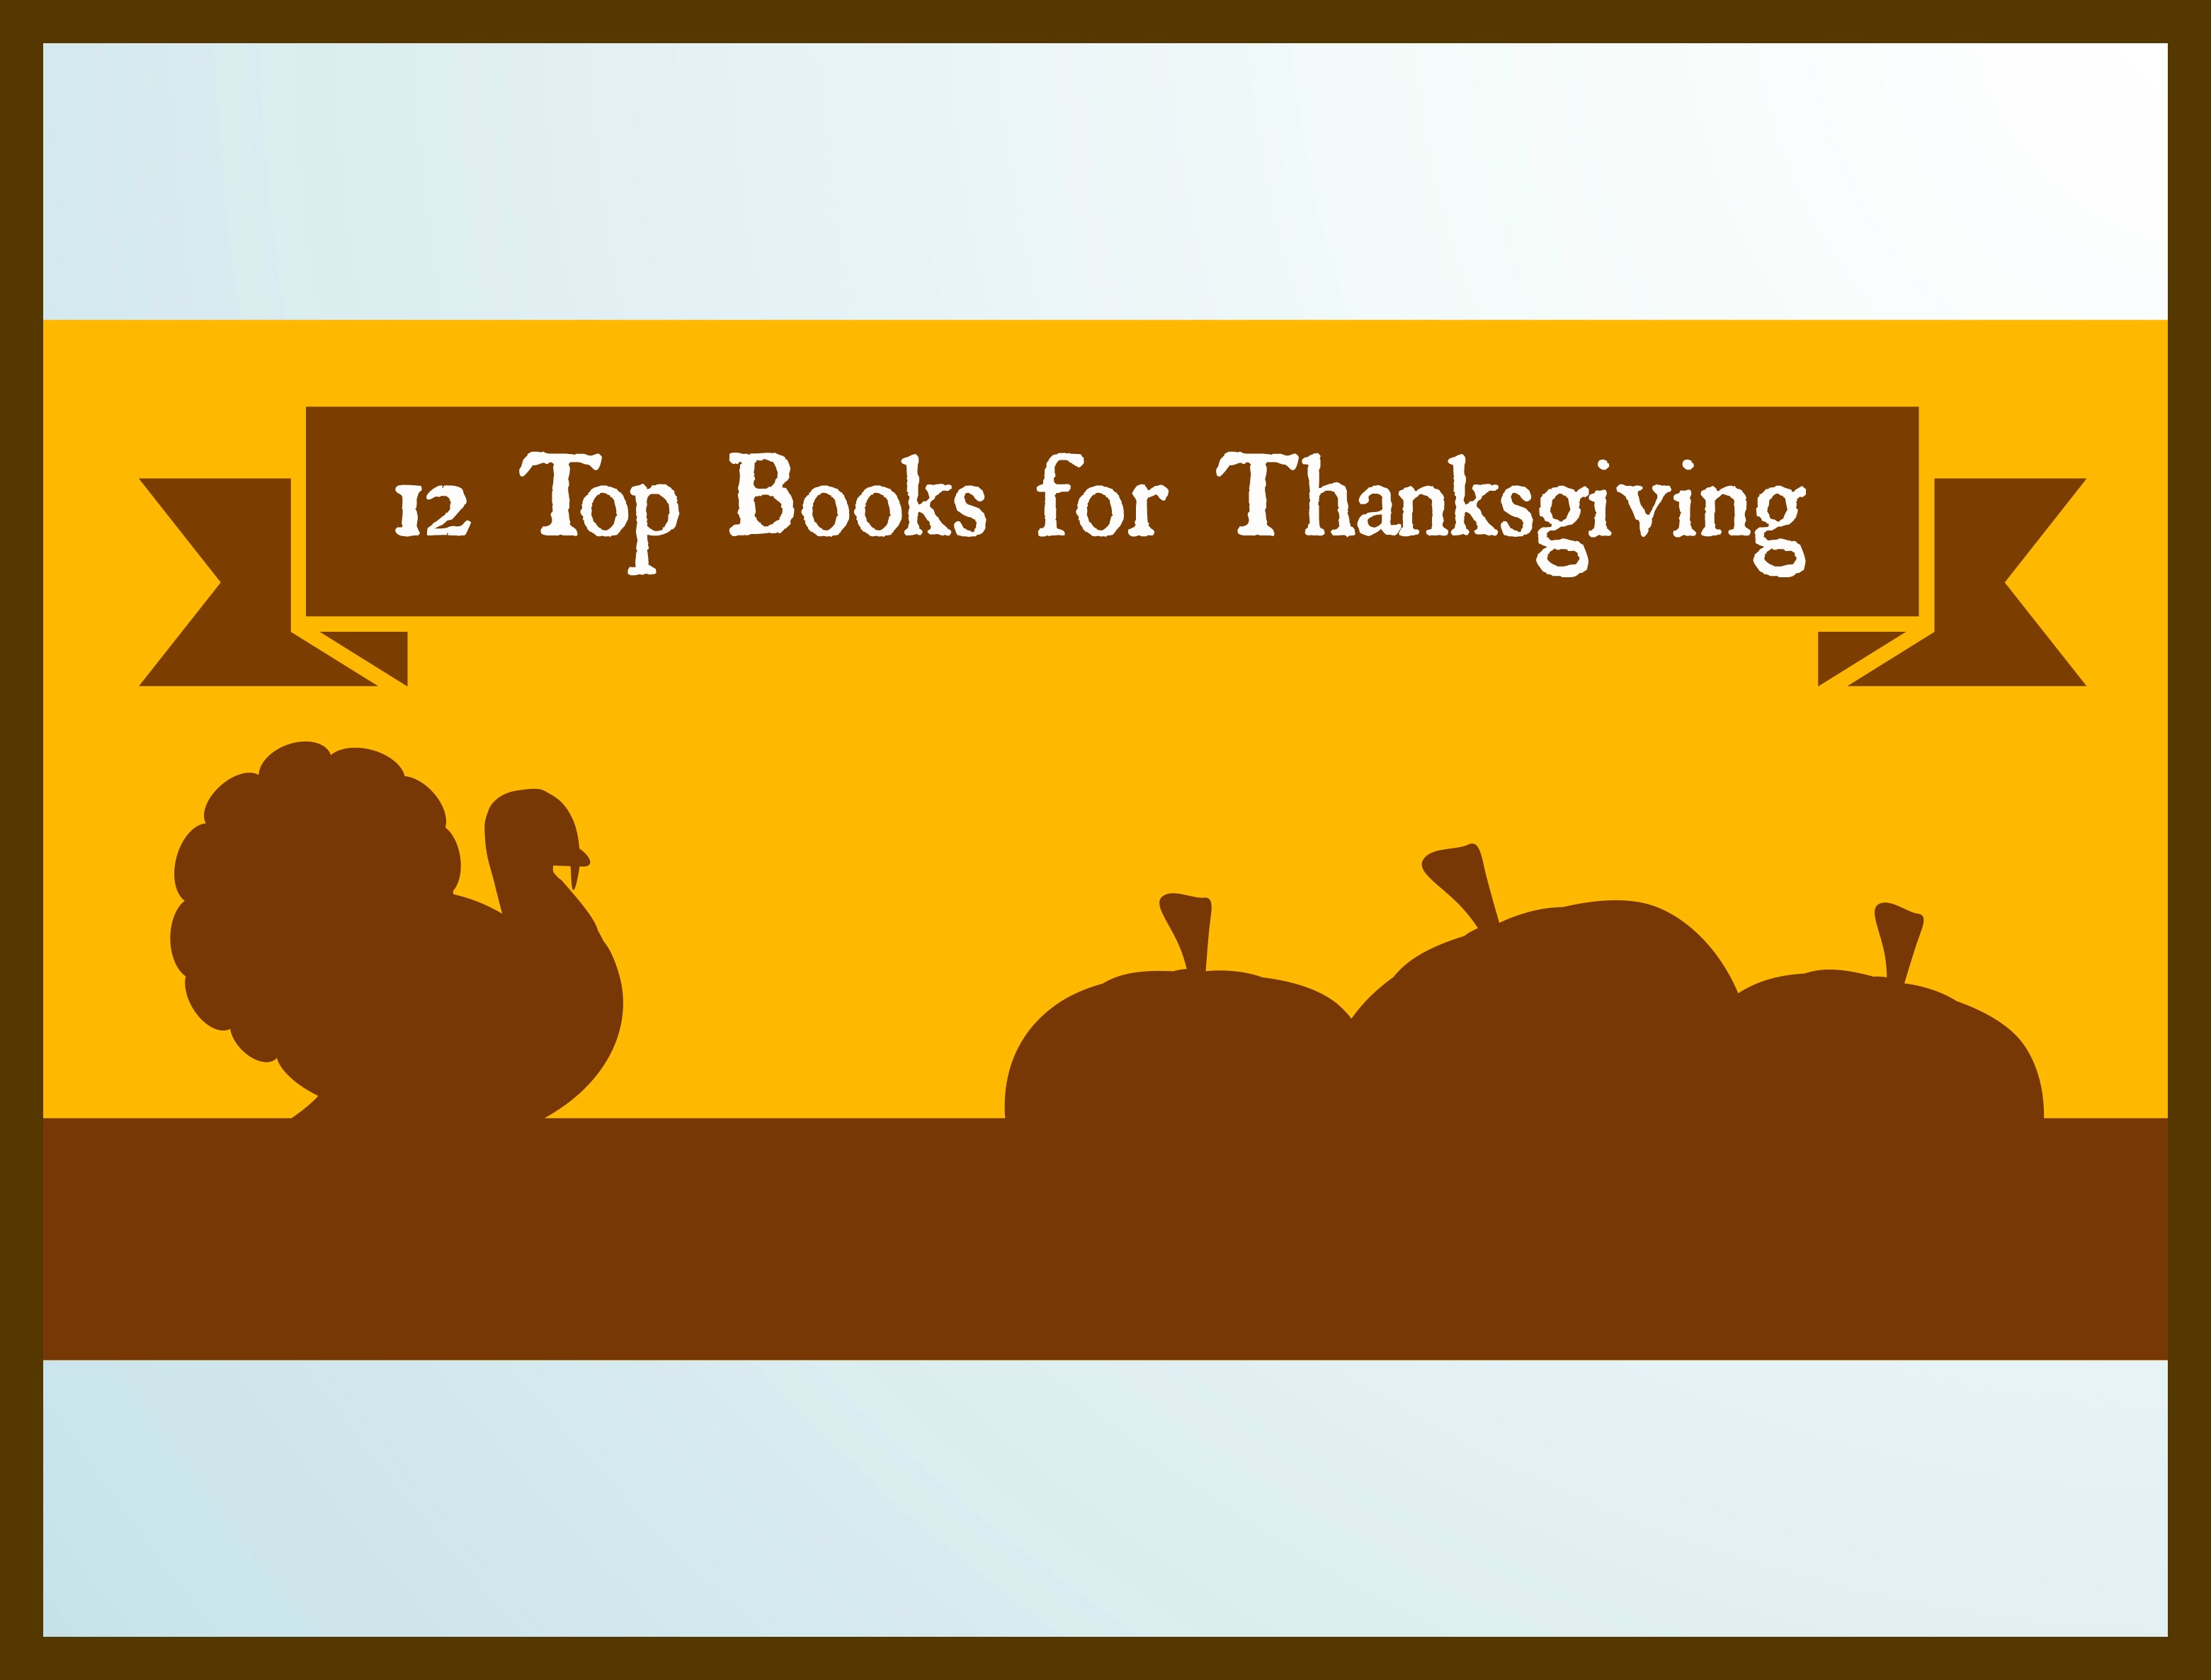 12 Top Books for Thanksgiving